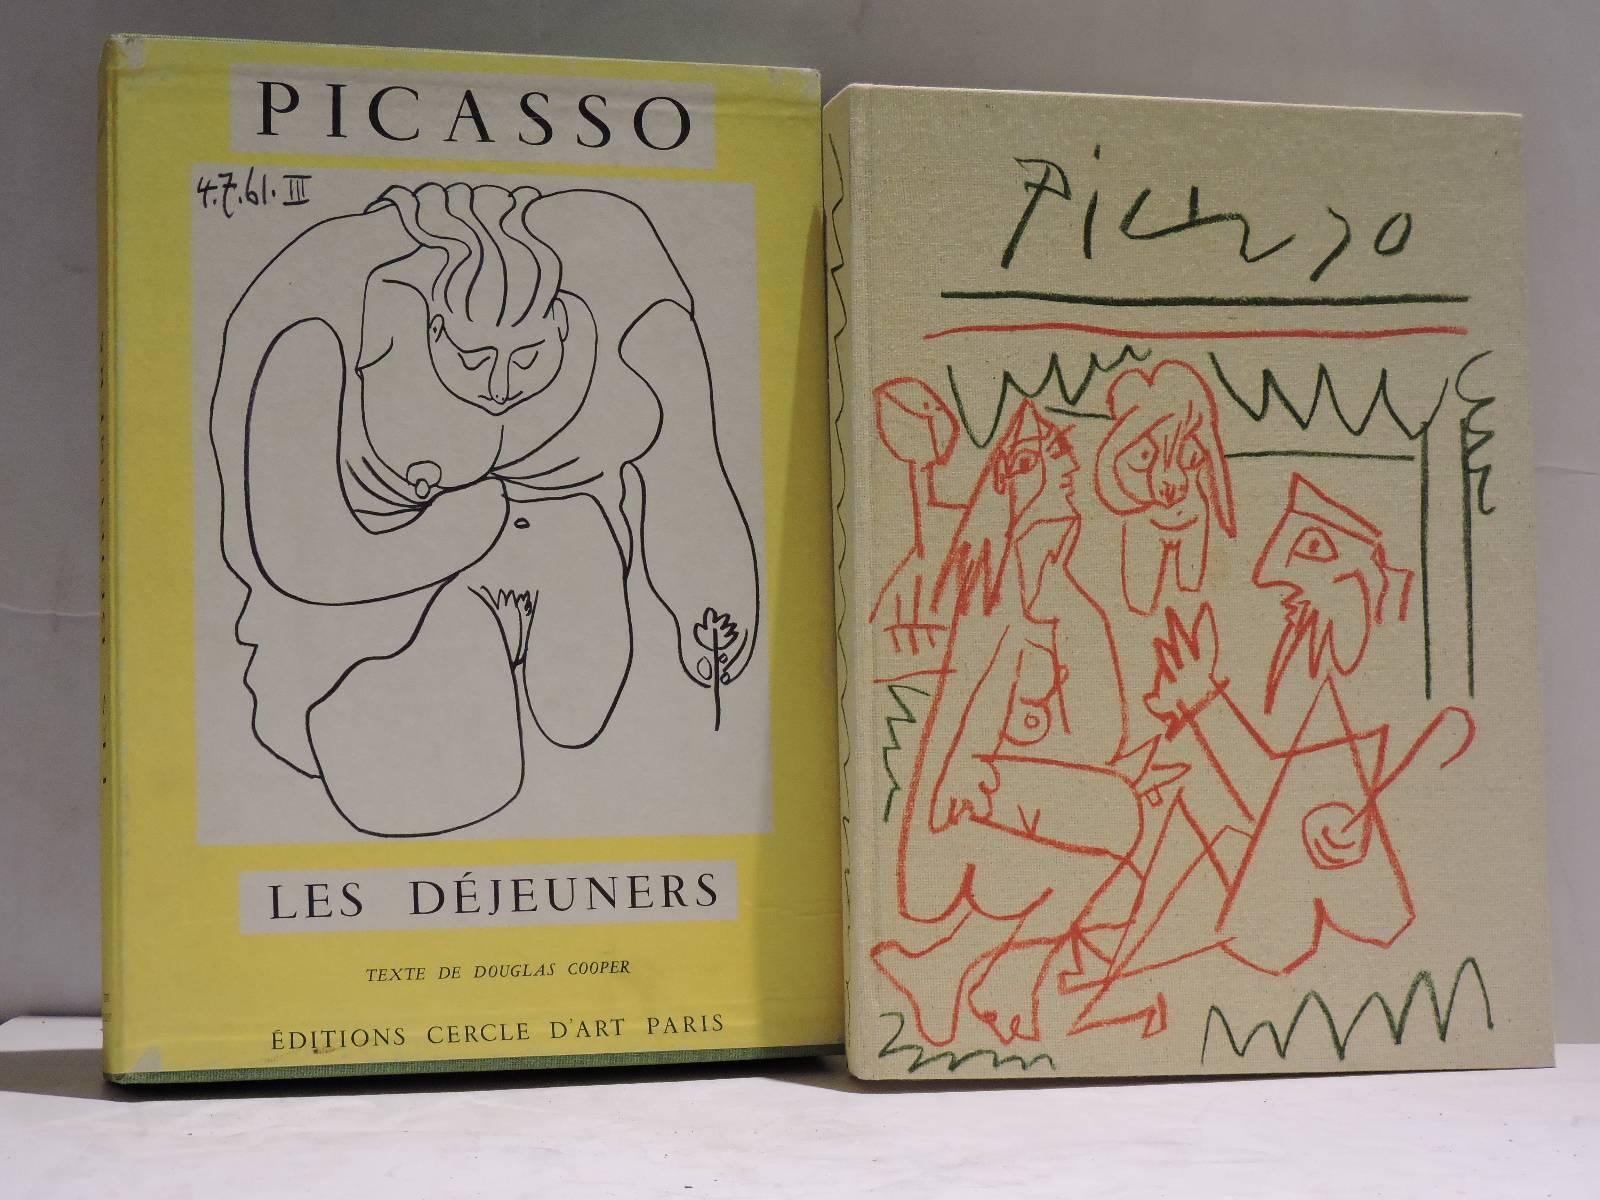 Picasso - Les Dejeuners - Editions Cercle D'Art - Paris - 1962 -- text in french by Douglas Cooper - first hard cover edition of a limited edition of 150 - large fully decorated cloth bound book in original decorated paper cloth slipcase. Thirty